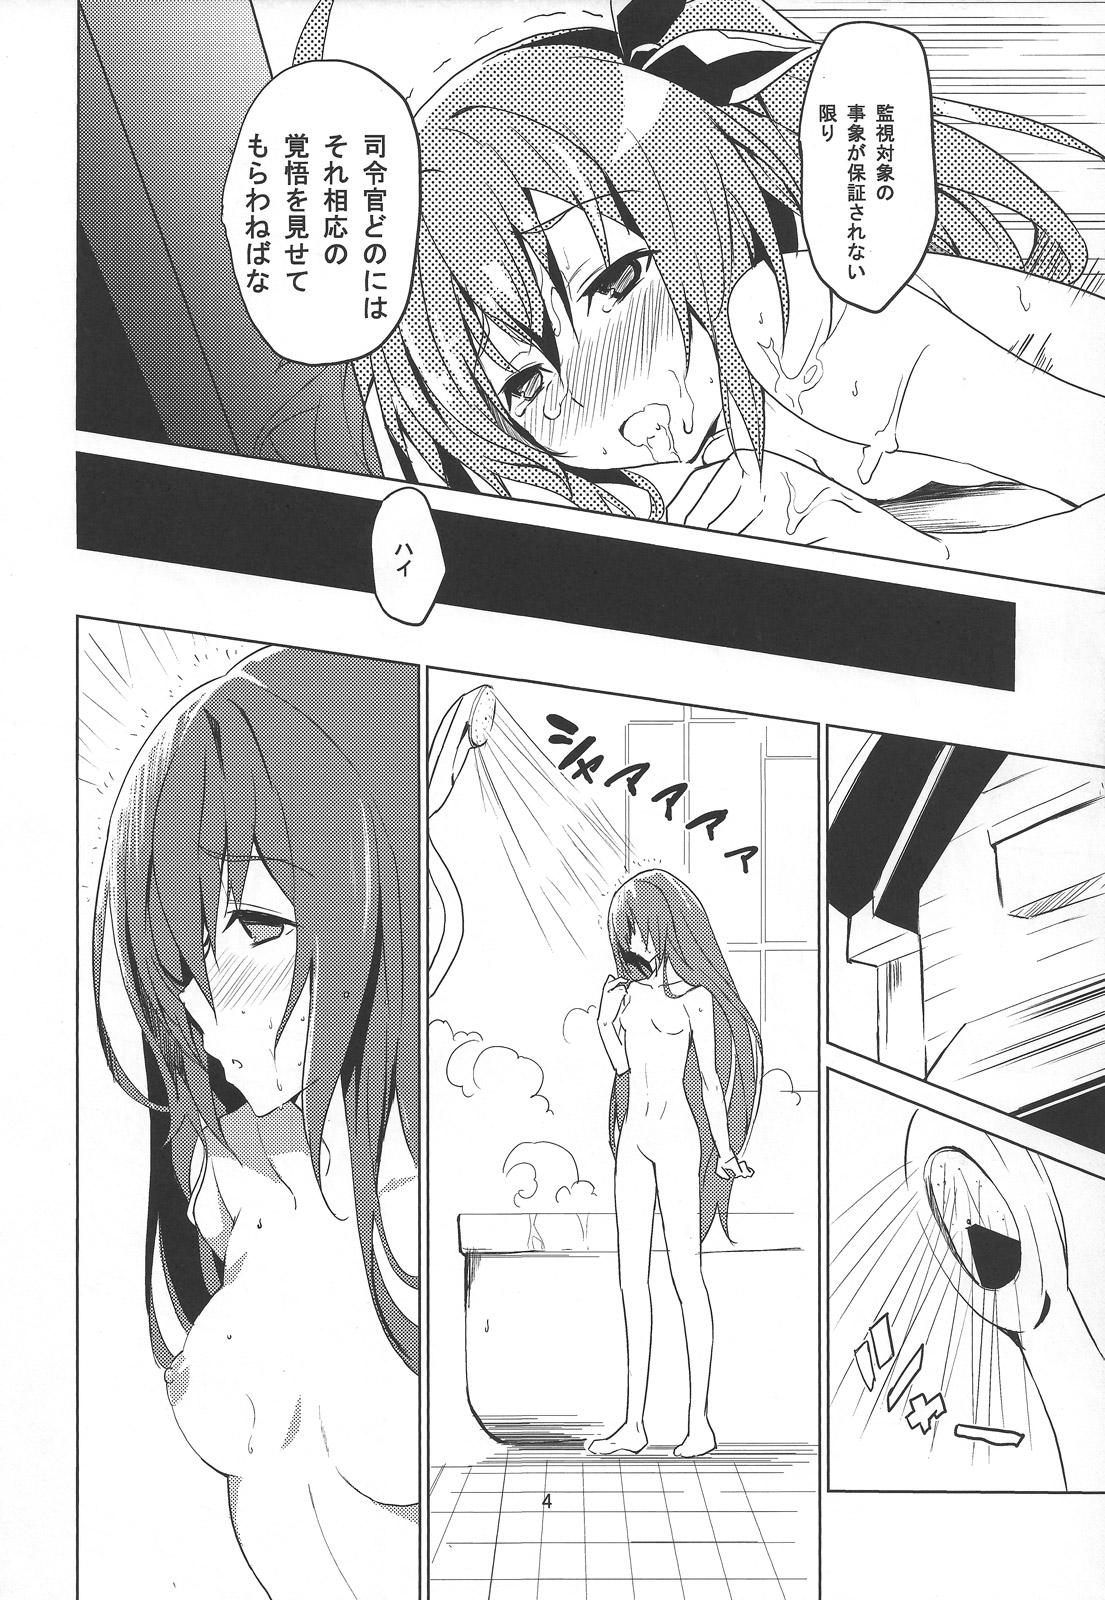 Ruiva hollie - Date a live Fun - Page 5